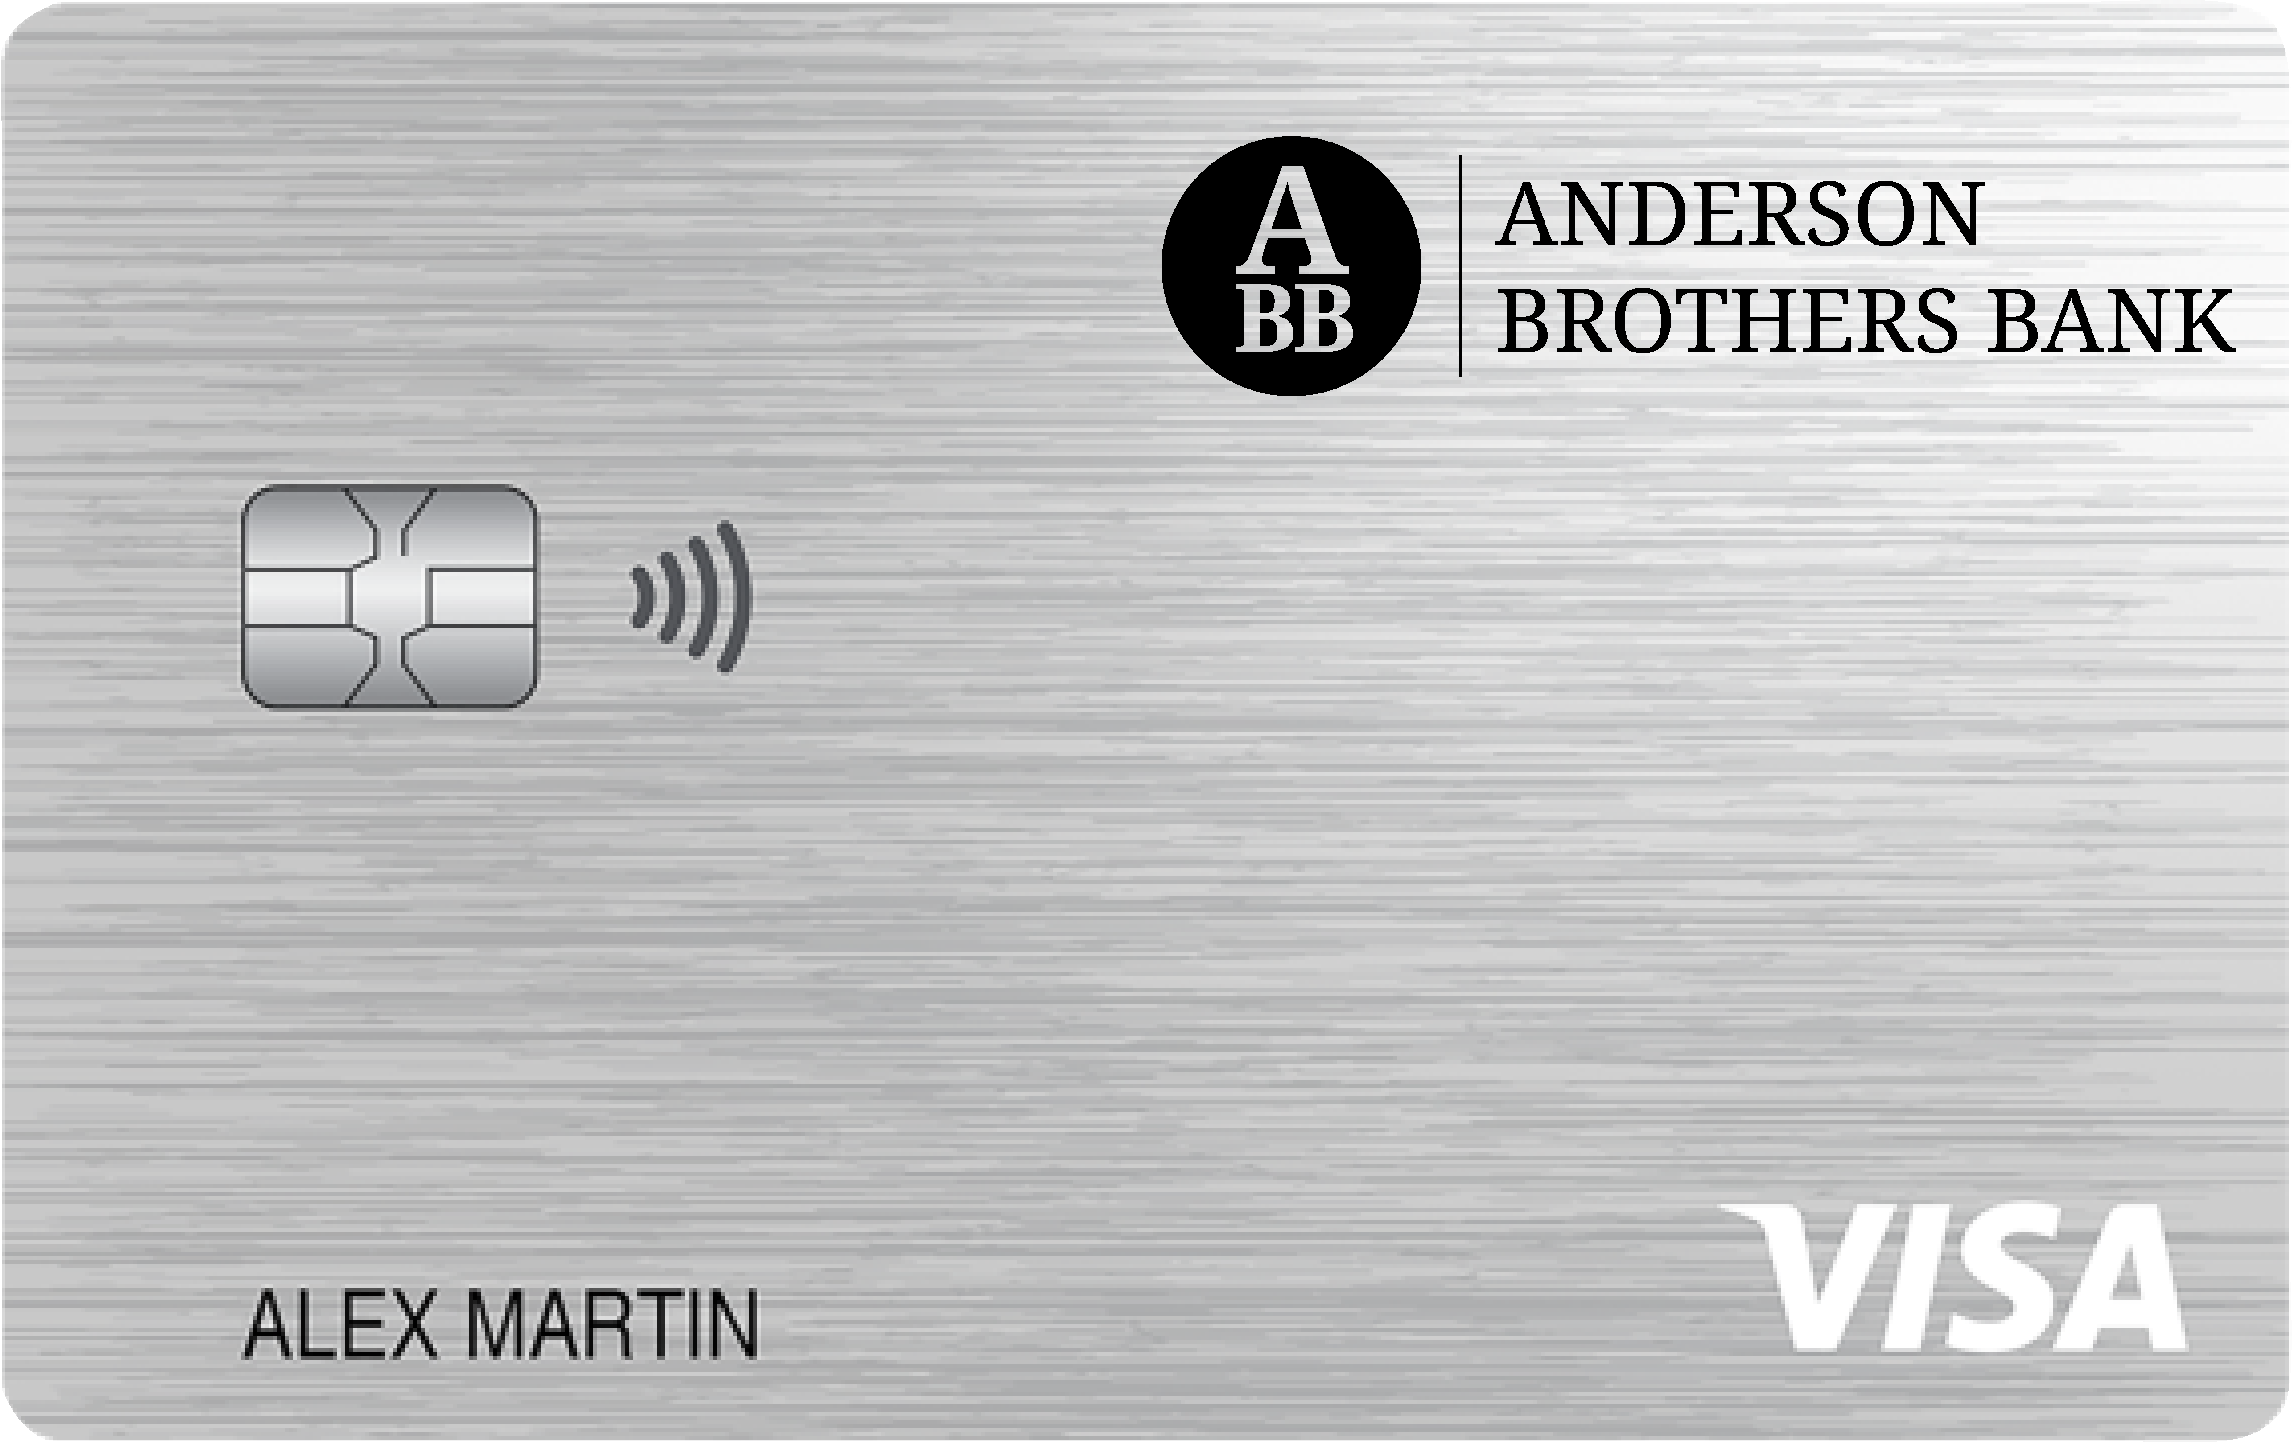 Anderson Brothers Bank Platinum Card